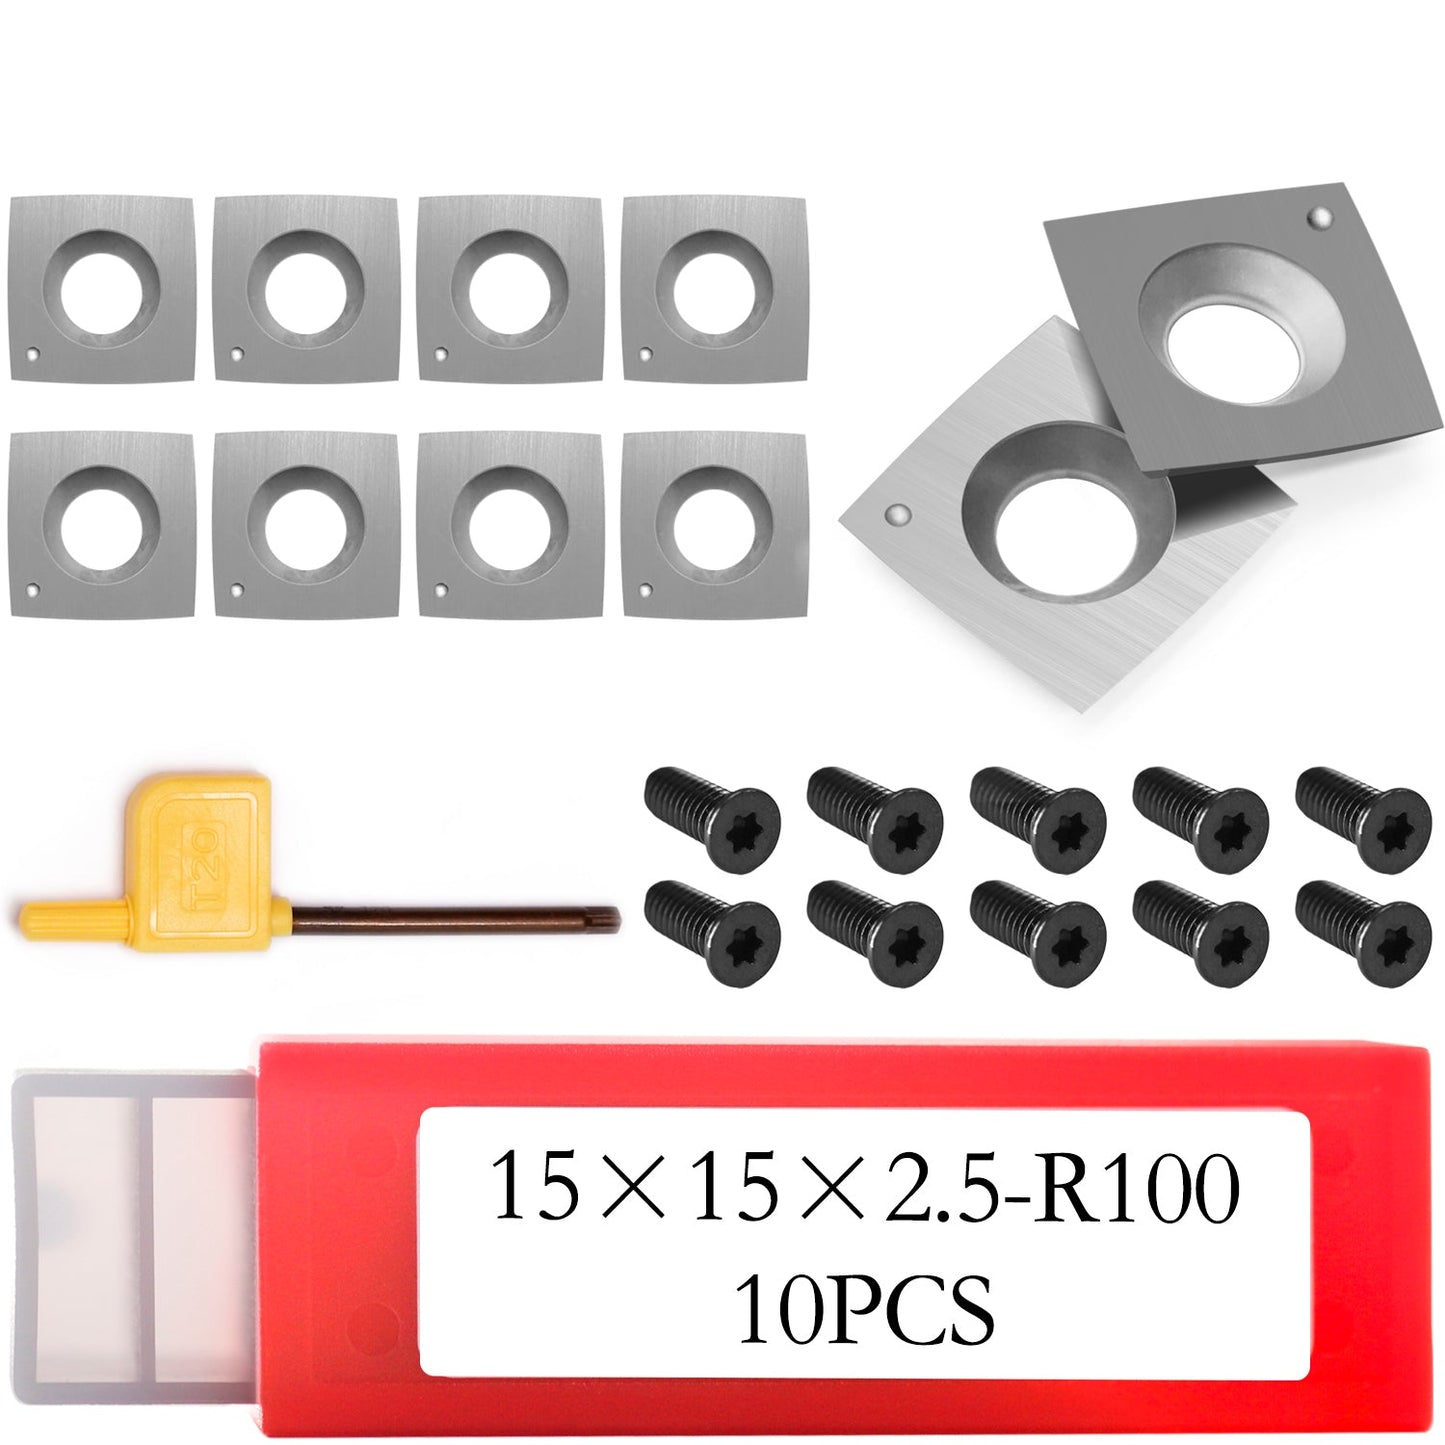 15x15x2.5mm-R100 Carbide Insert Cutter for Powermatic/ Jet 1791212 for Shelix Heads